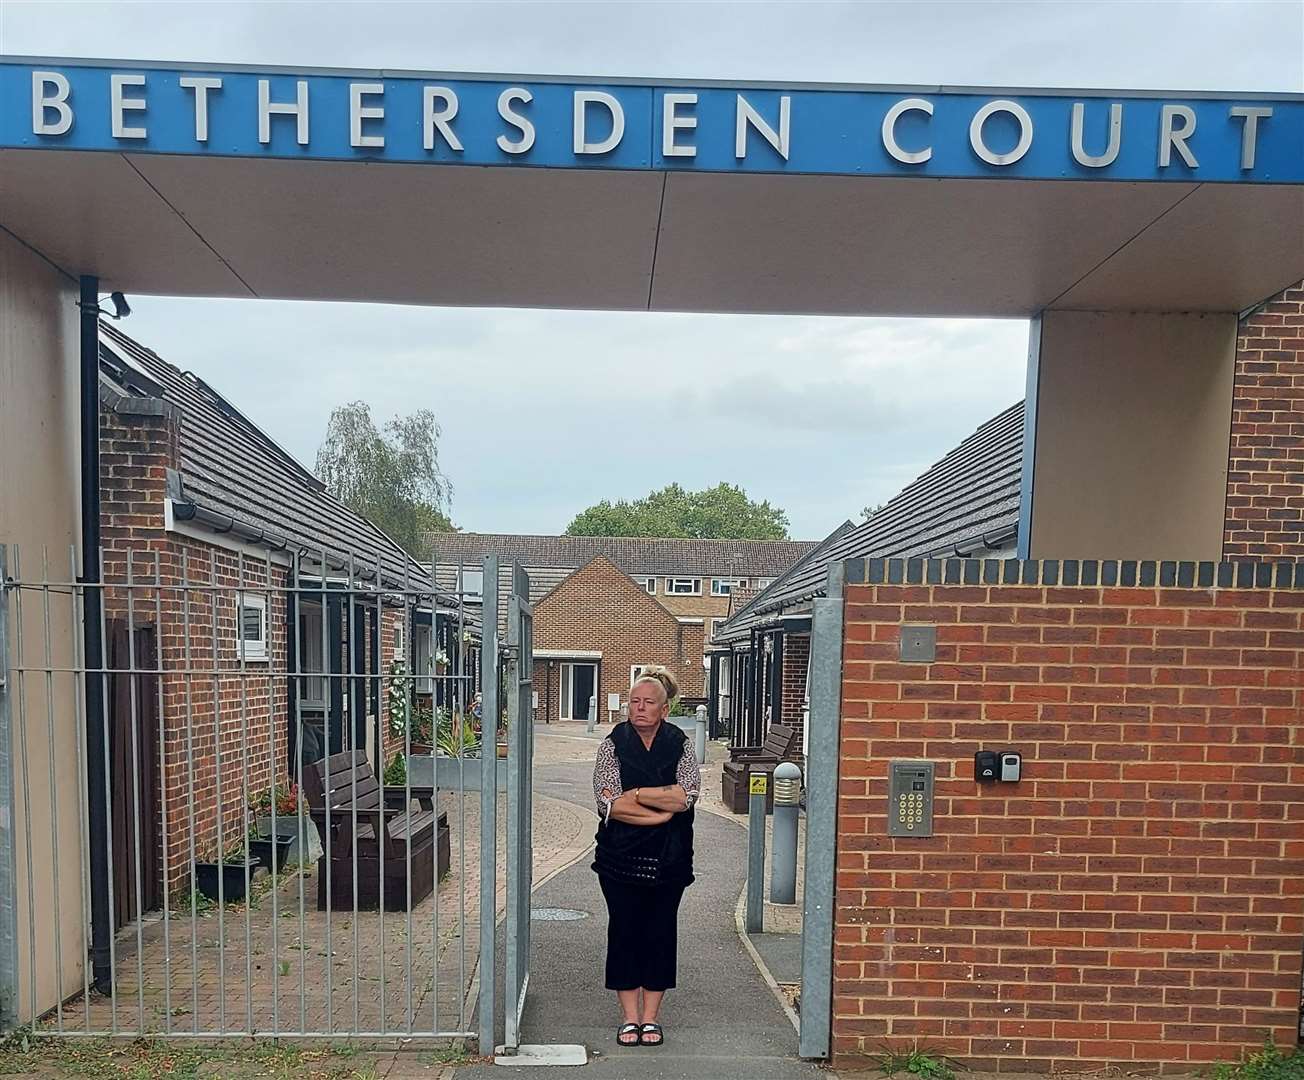 Linda at the entrance of Bethersden Court